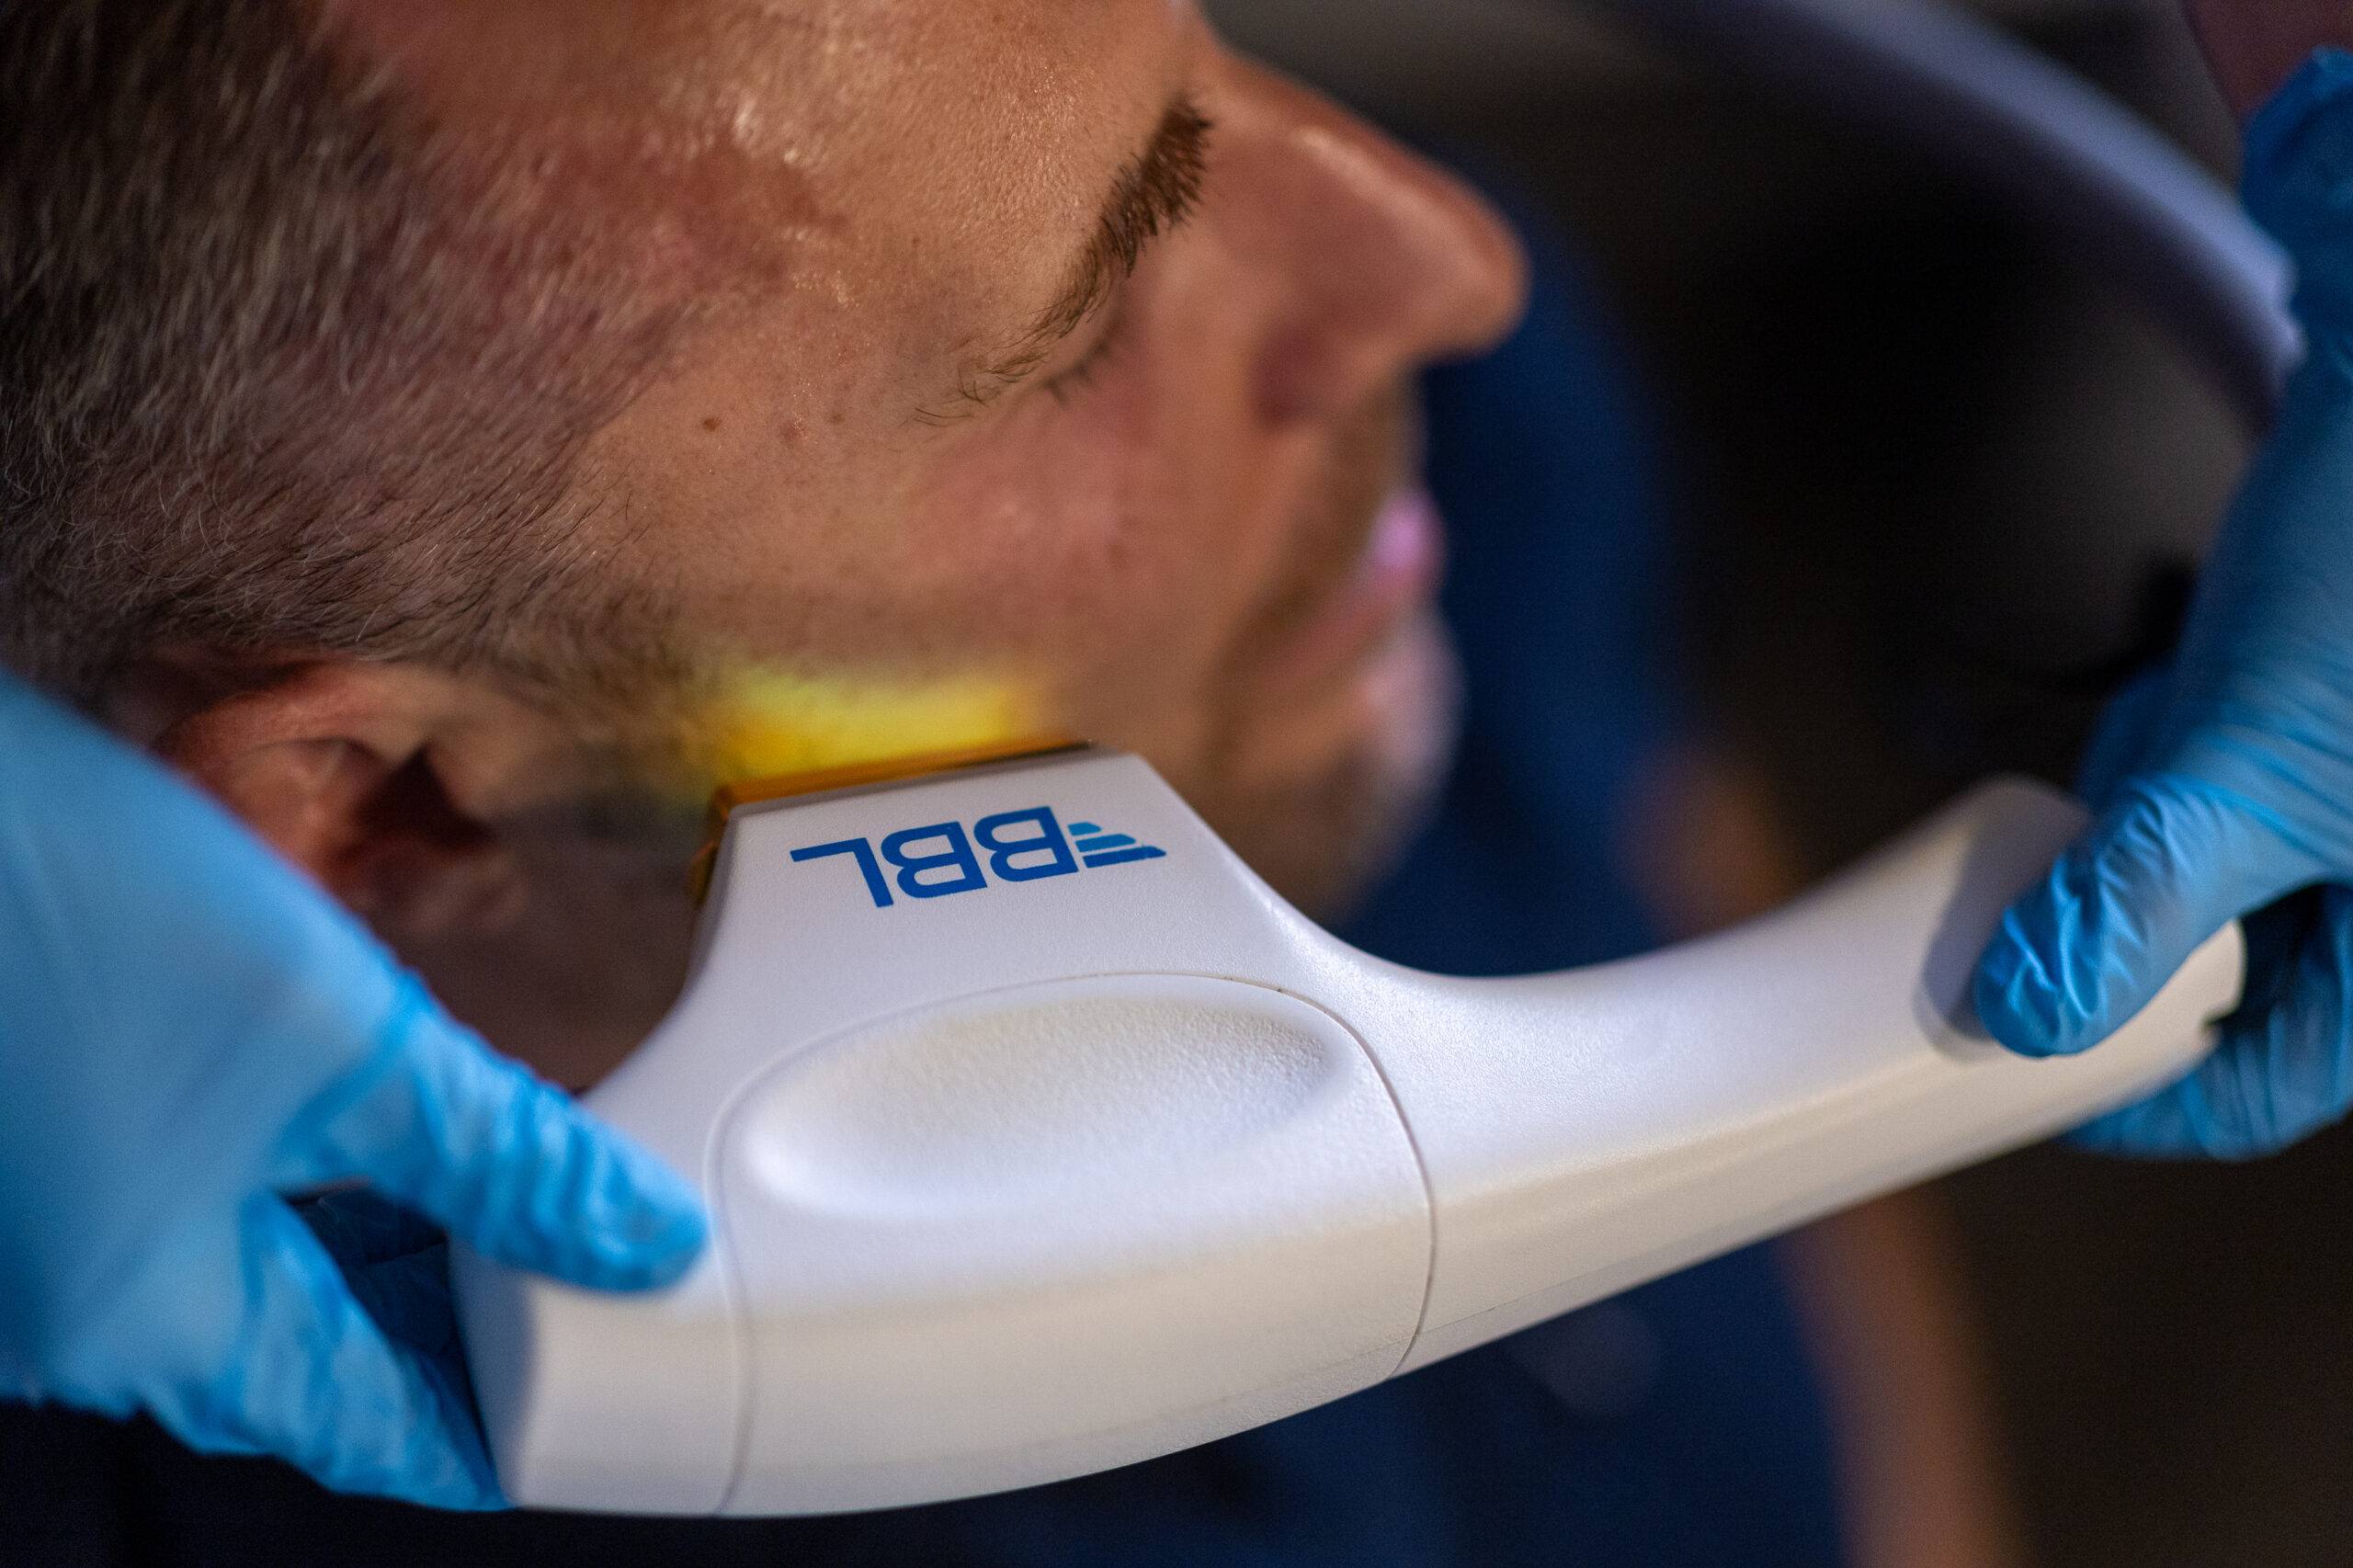 A close-up of a man undergoing a dental x-ray, with a dental assistant wearing blue gloves holding the BroadBand Light Therapy device under his chin. The device is labeled with the number "987".